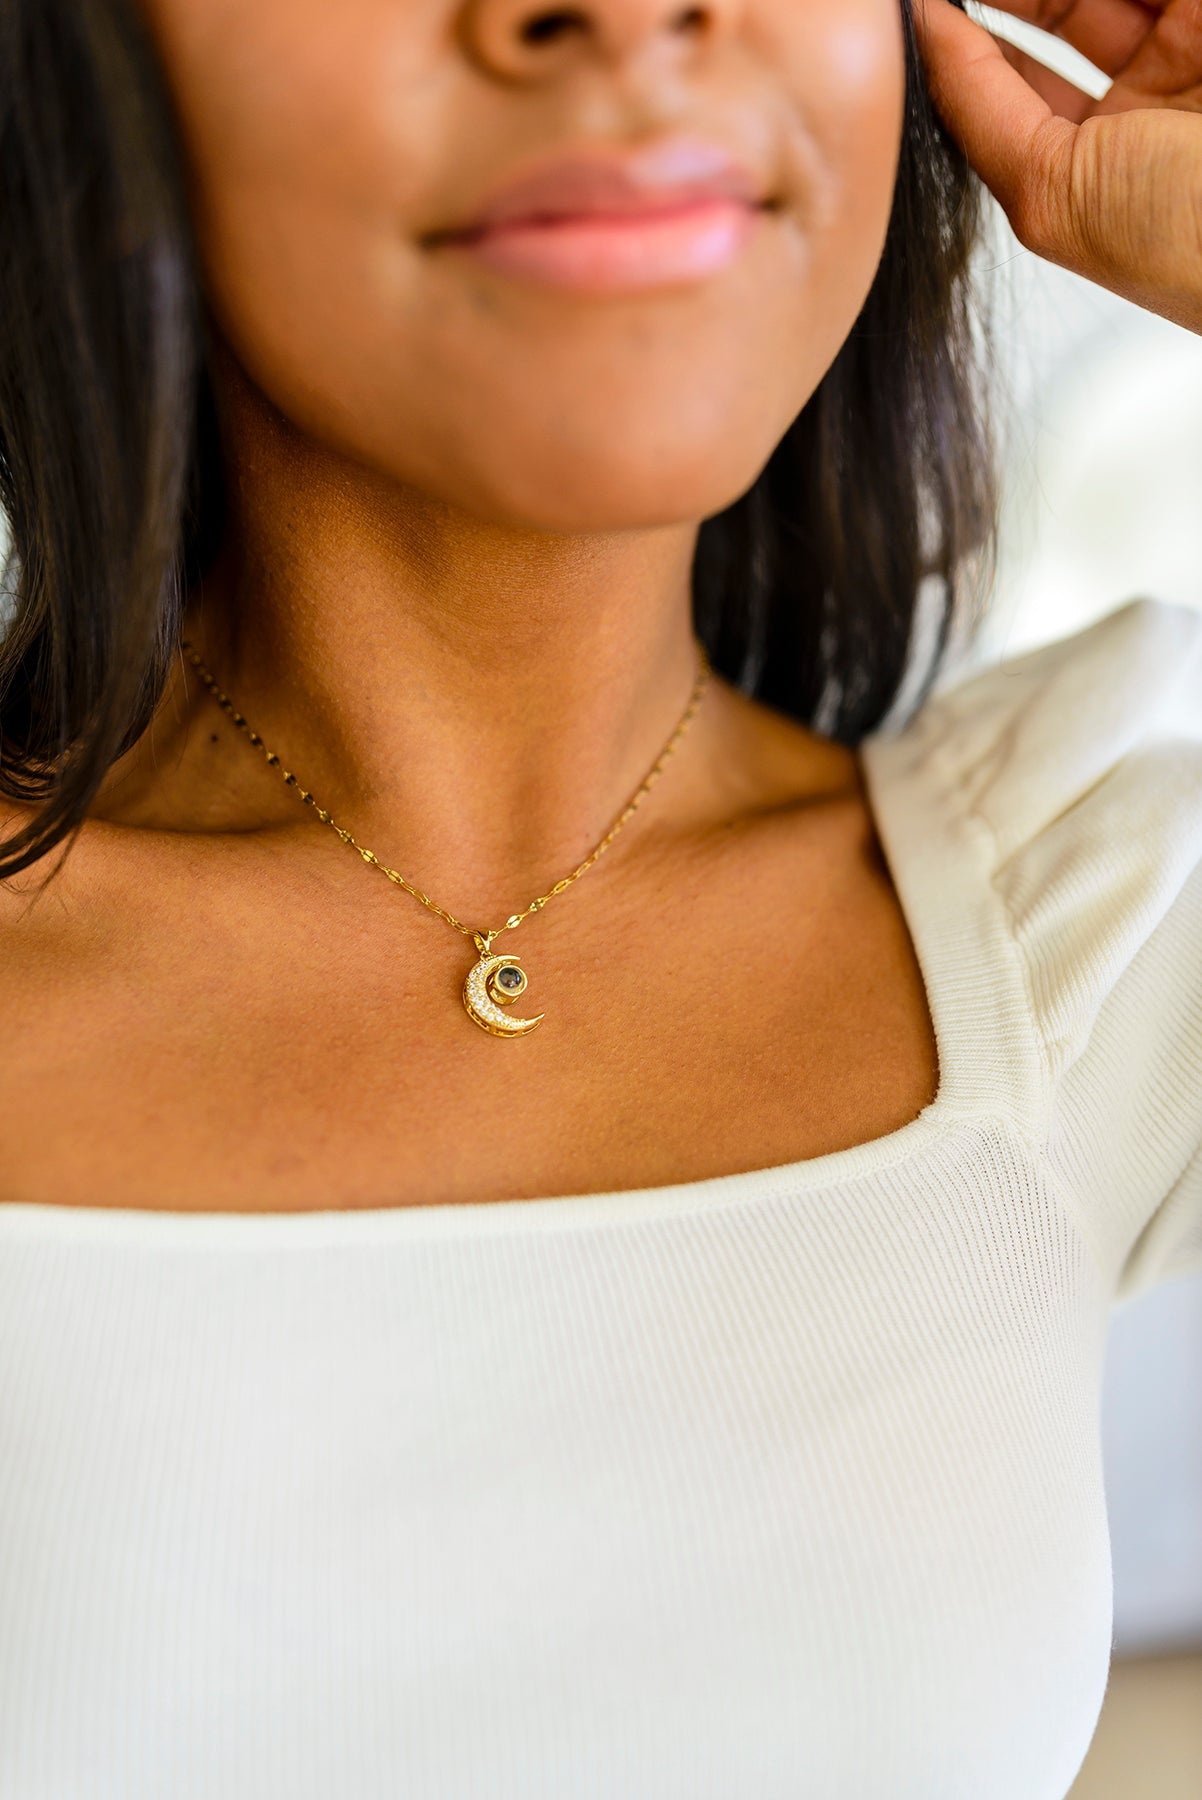 Celestial Chic Crescent Moon Necklace   